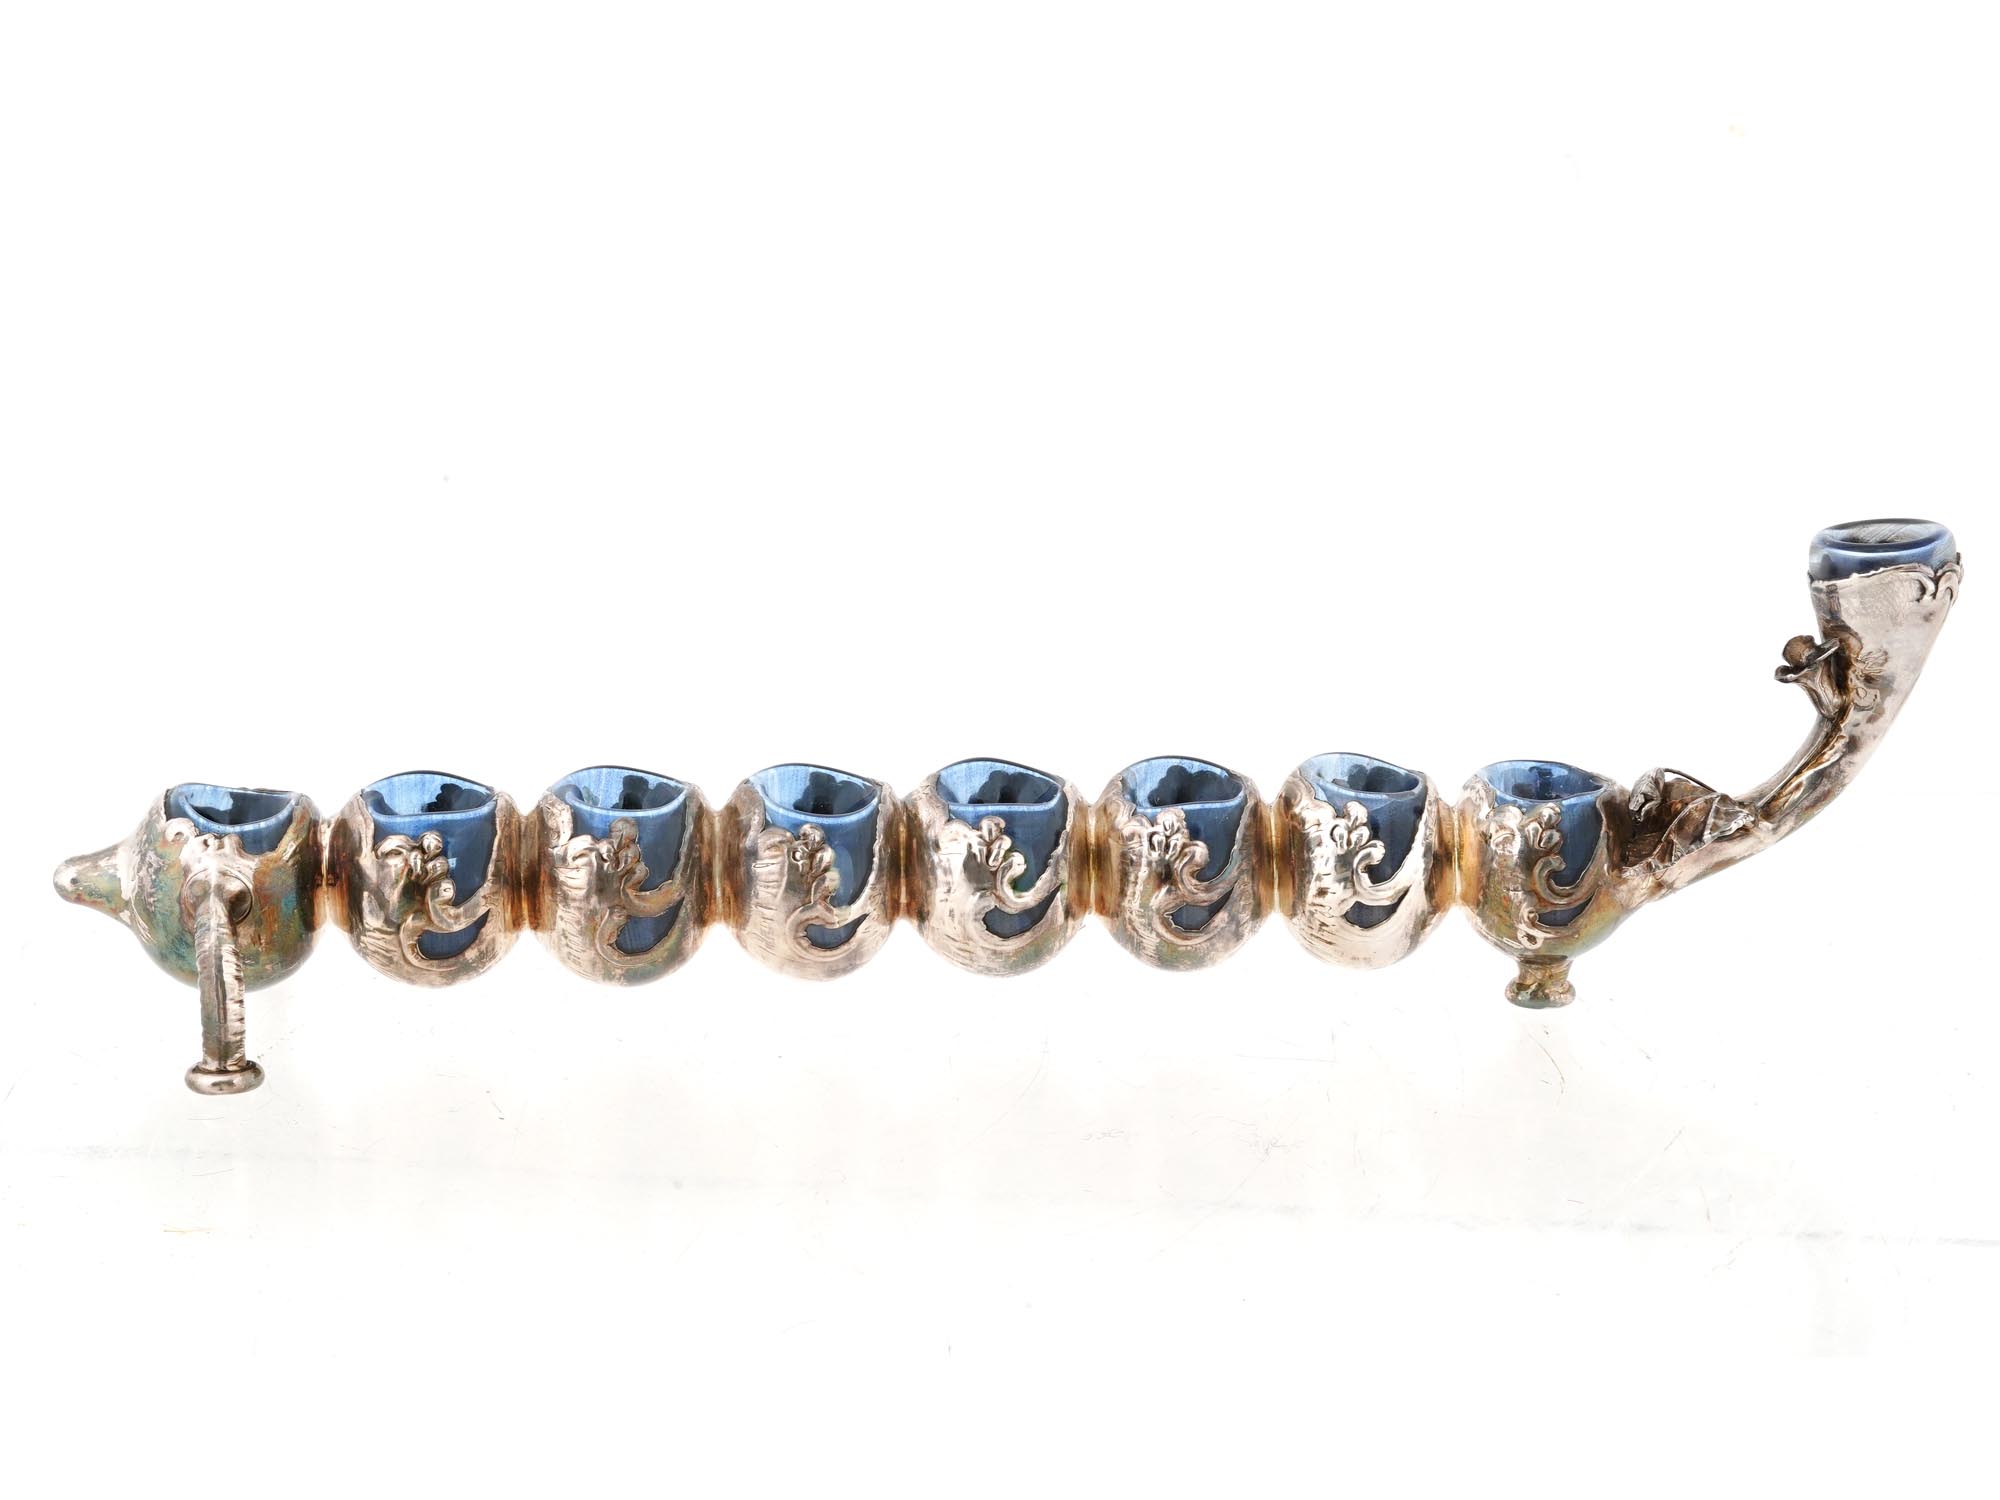 JUDAICA STERLING SILVER GLASS MENORAH CANDLE HOLDER PIC-1